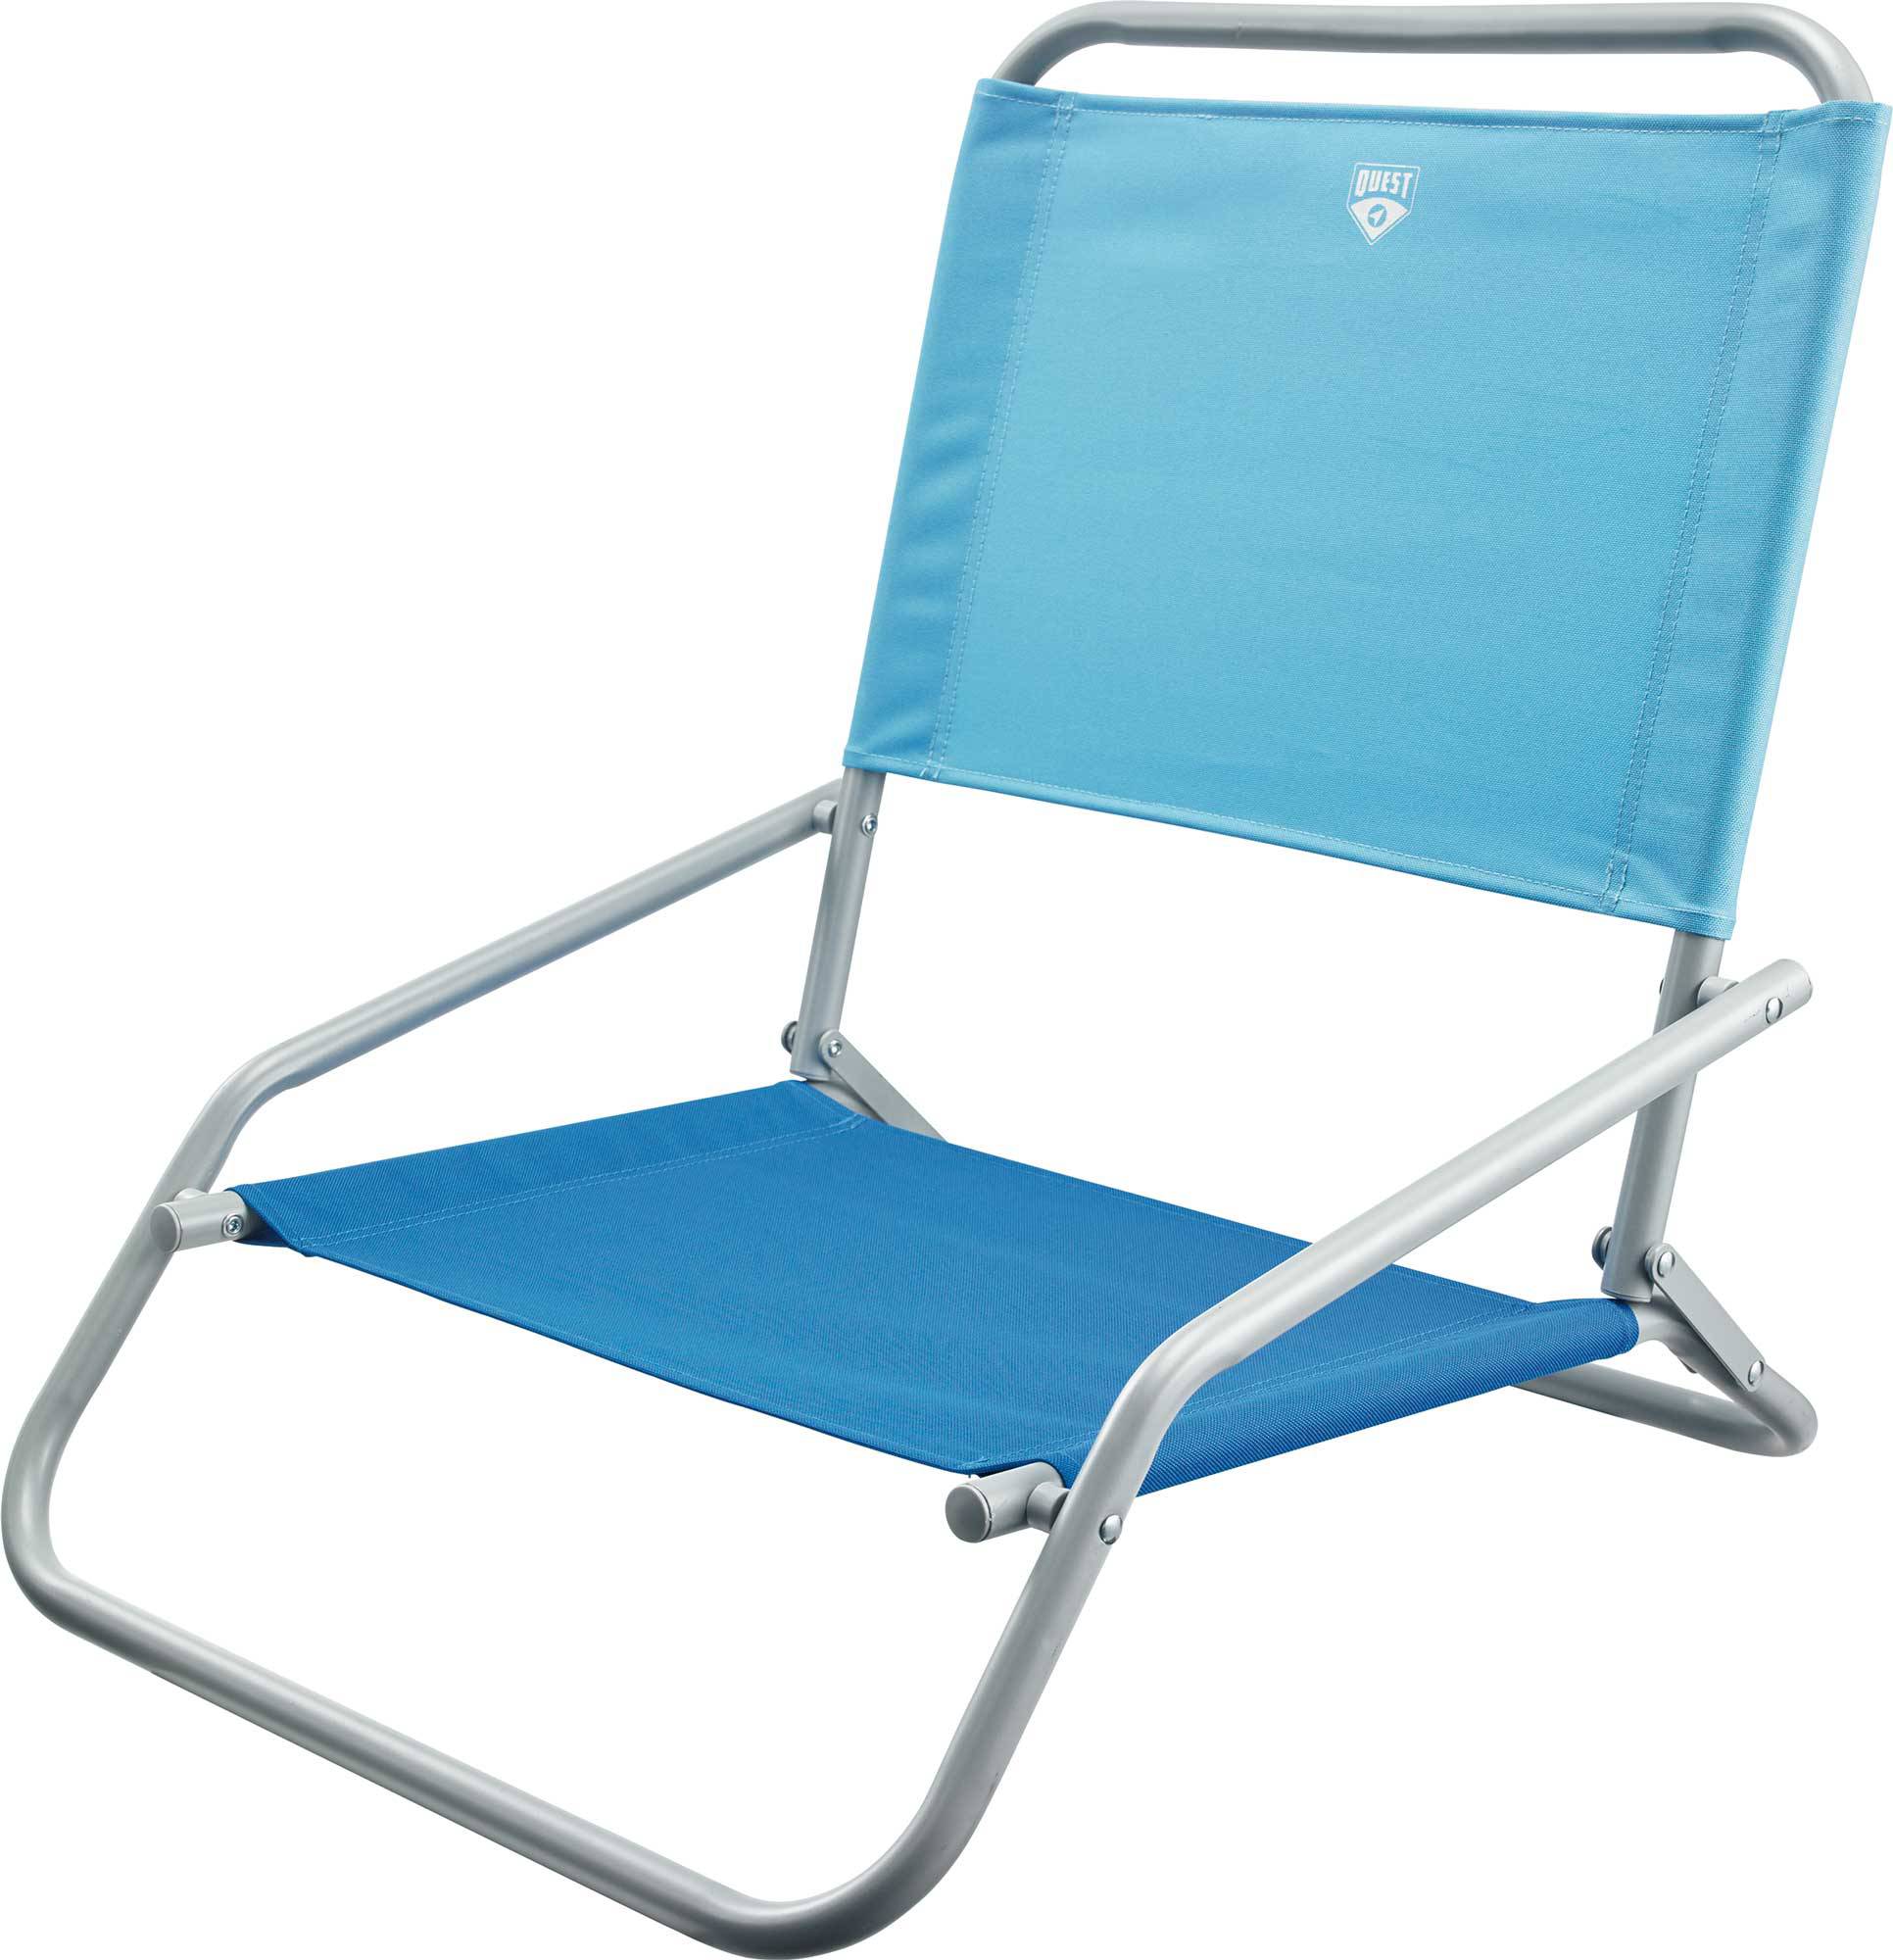 New Quest Traveller Beach Chair with Simple Decor